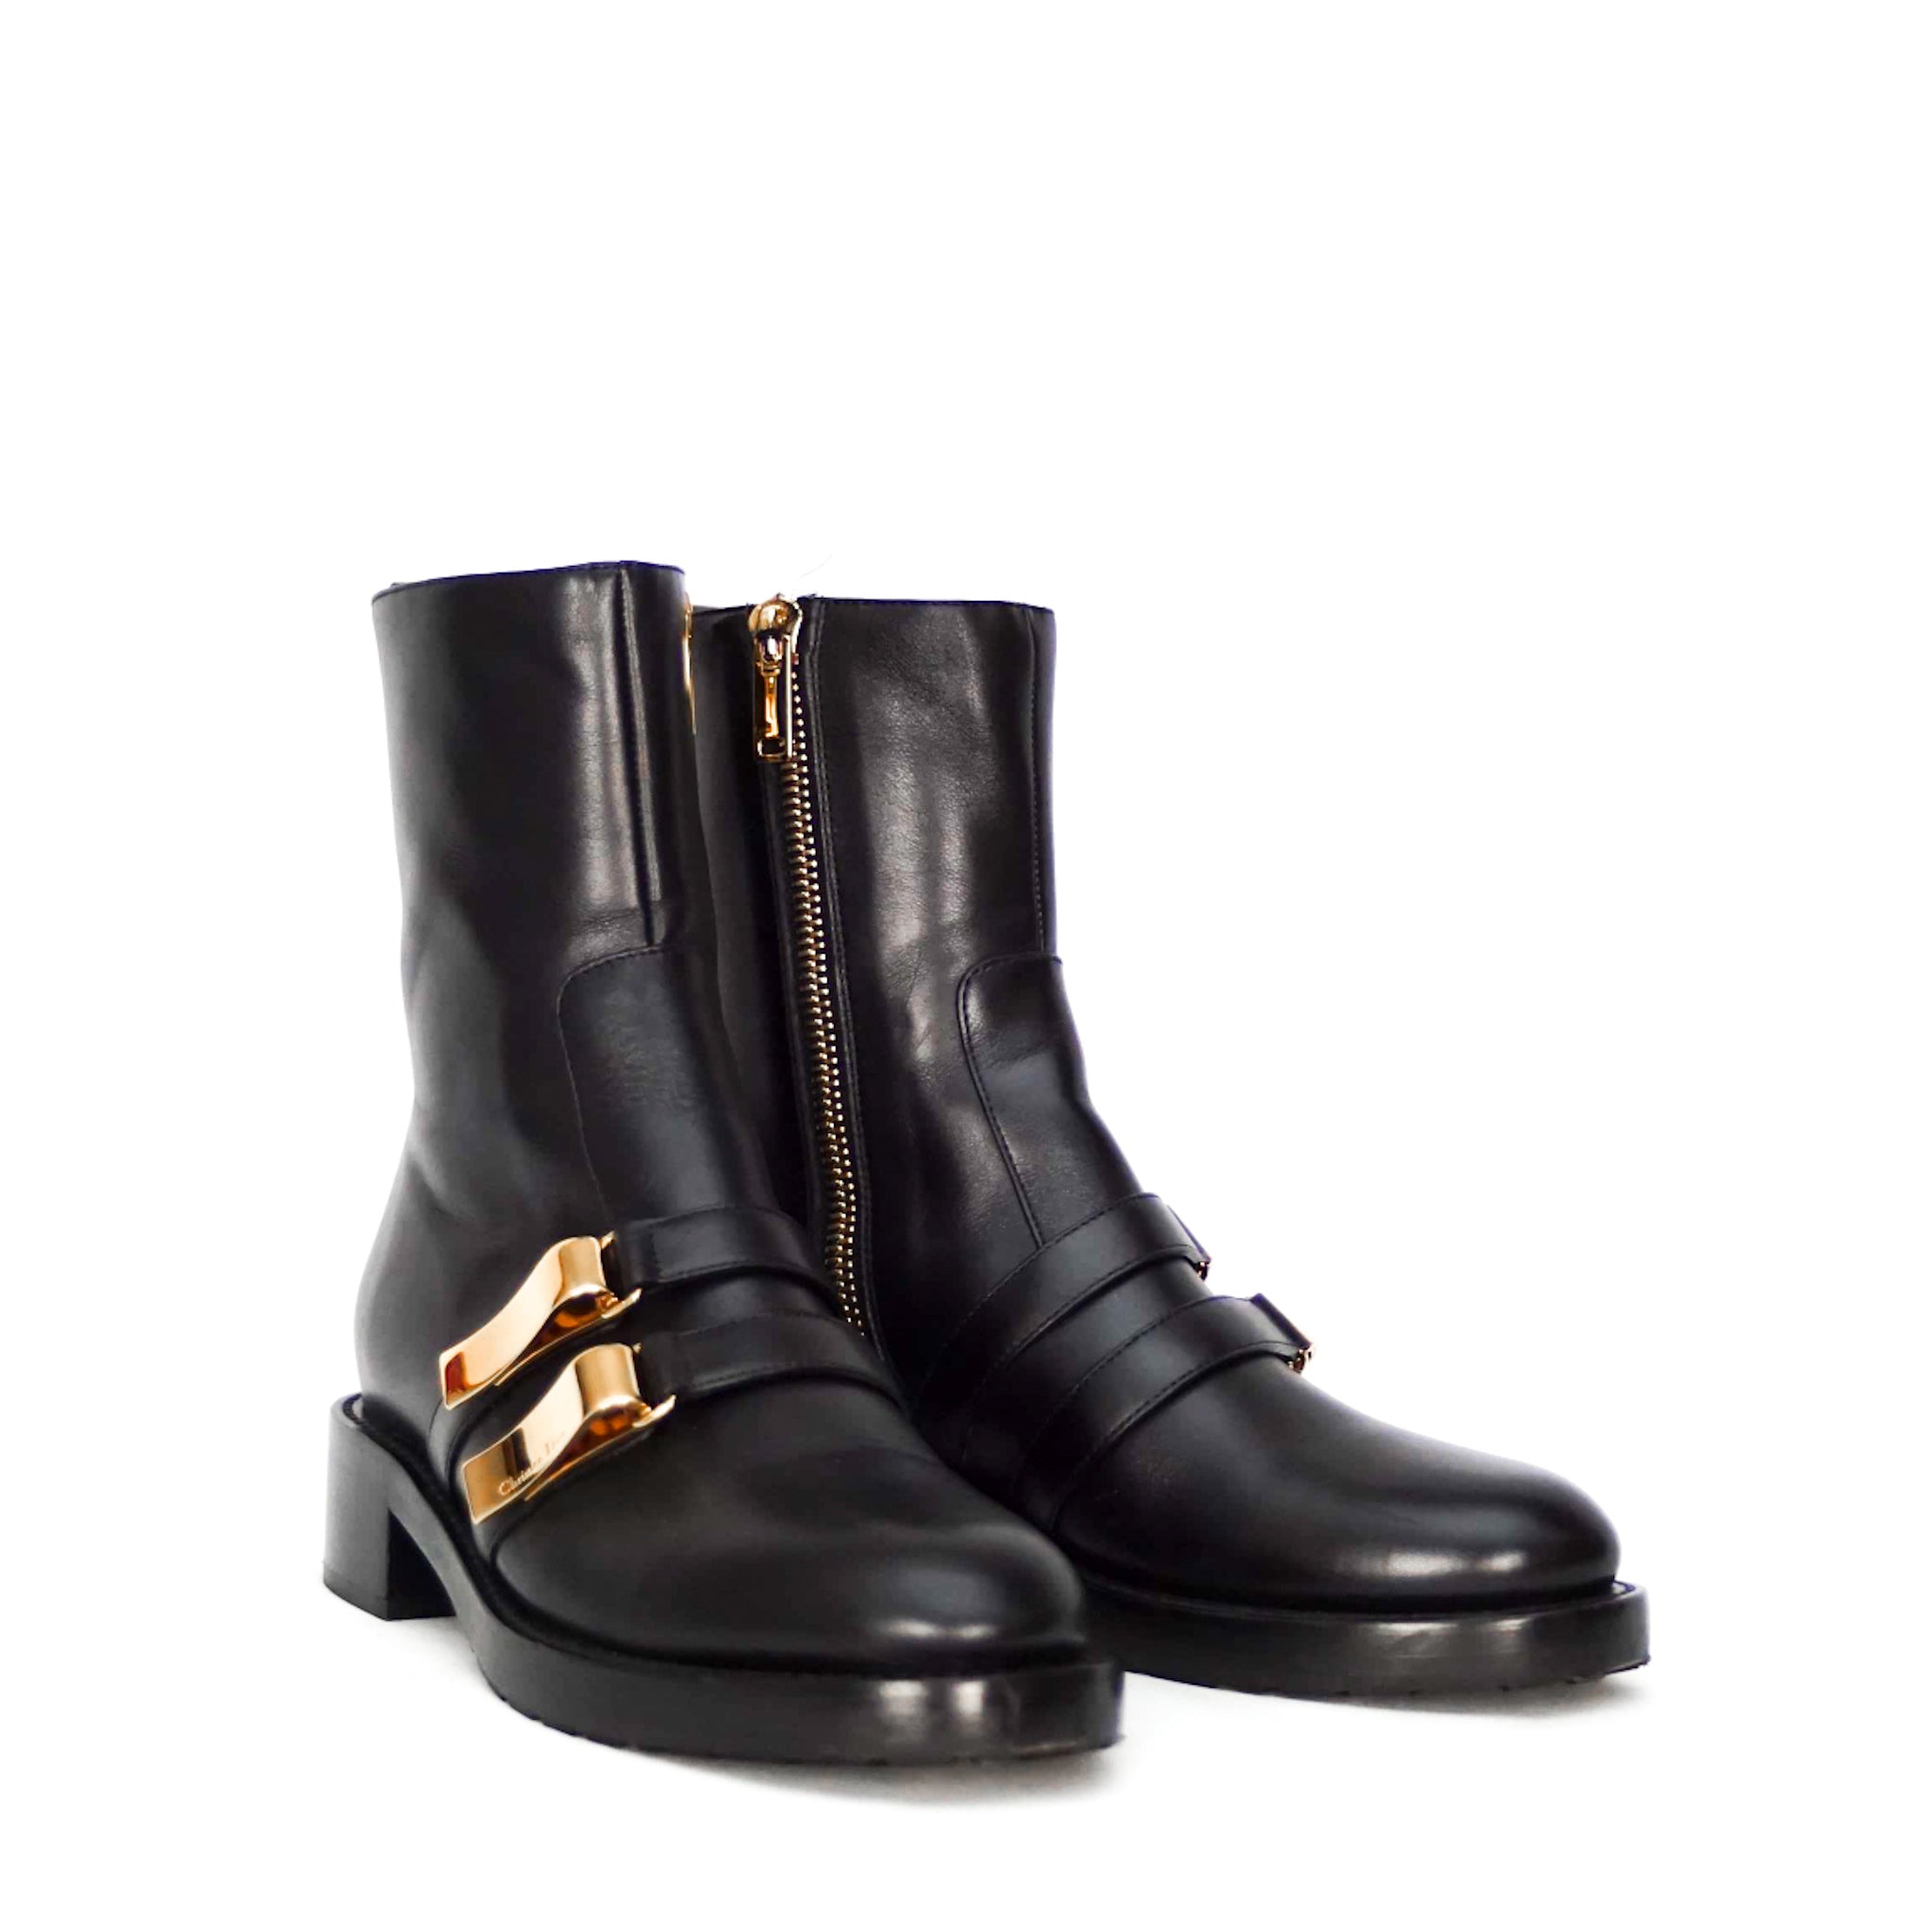 Boots Dior Black size 40 EU in Synthetic - 33253019